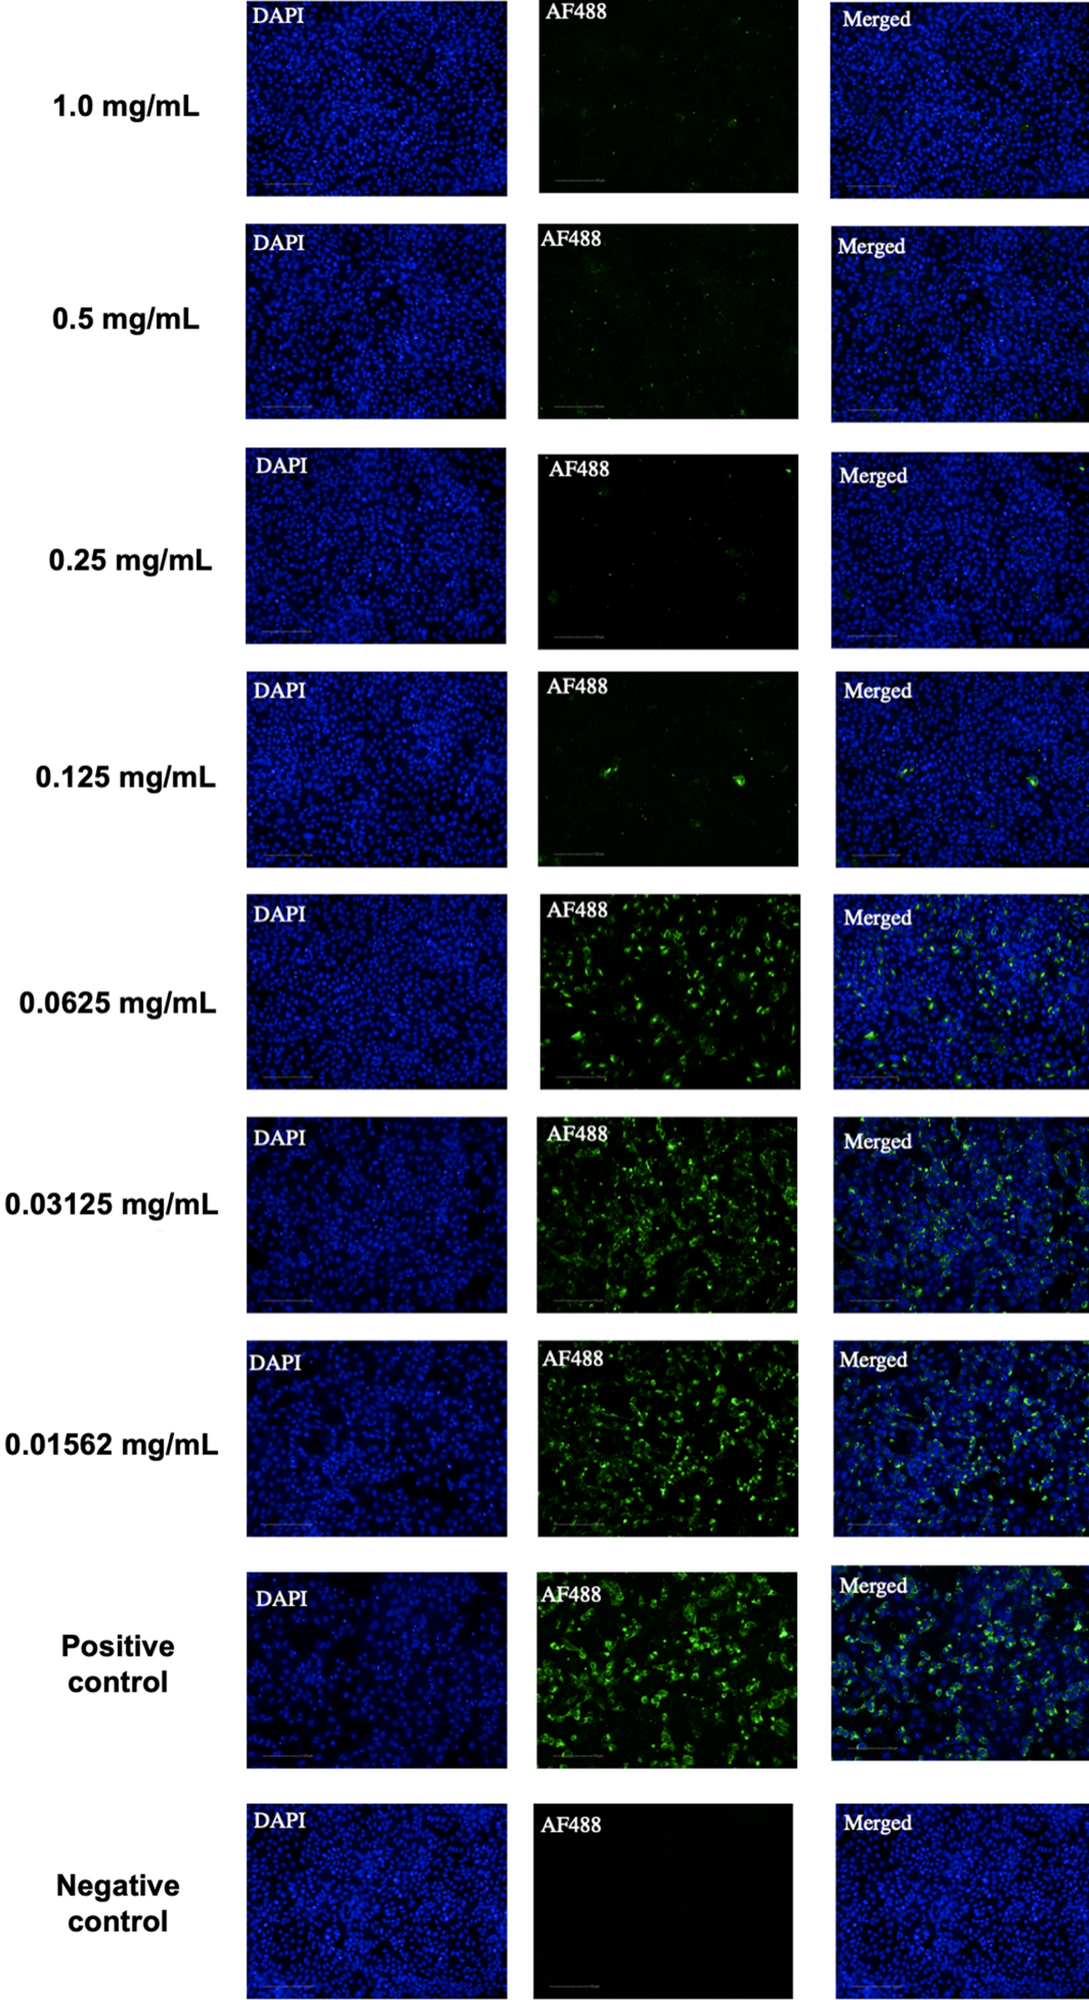 Indirect immunofluorescence (IIF) assay for the detection of SARS-CoV-2-infected cells. Representative images of the noncytotoxic concentrations (1.0 mg/mL up to 0.156 mg/mL) of APD observed with a 20 × objective. A mixture of MERS-CoV-infected and noninfected Vero cells was stained with convalescent serum monoclonal antibodies, followed by incubation with the Alexa488-conjugated goat anti-human IgG antibodies (green). Cells were counterstained with DAPI to stain the nuclei (blue). Positive (infected nontreated cells) and negative (noninfected cells) controls are shown at the bottom of the image. Images were taken using the Operetta High Content Imaging System (Perkin Elmer). Scale bar, 100 µm.